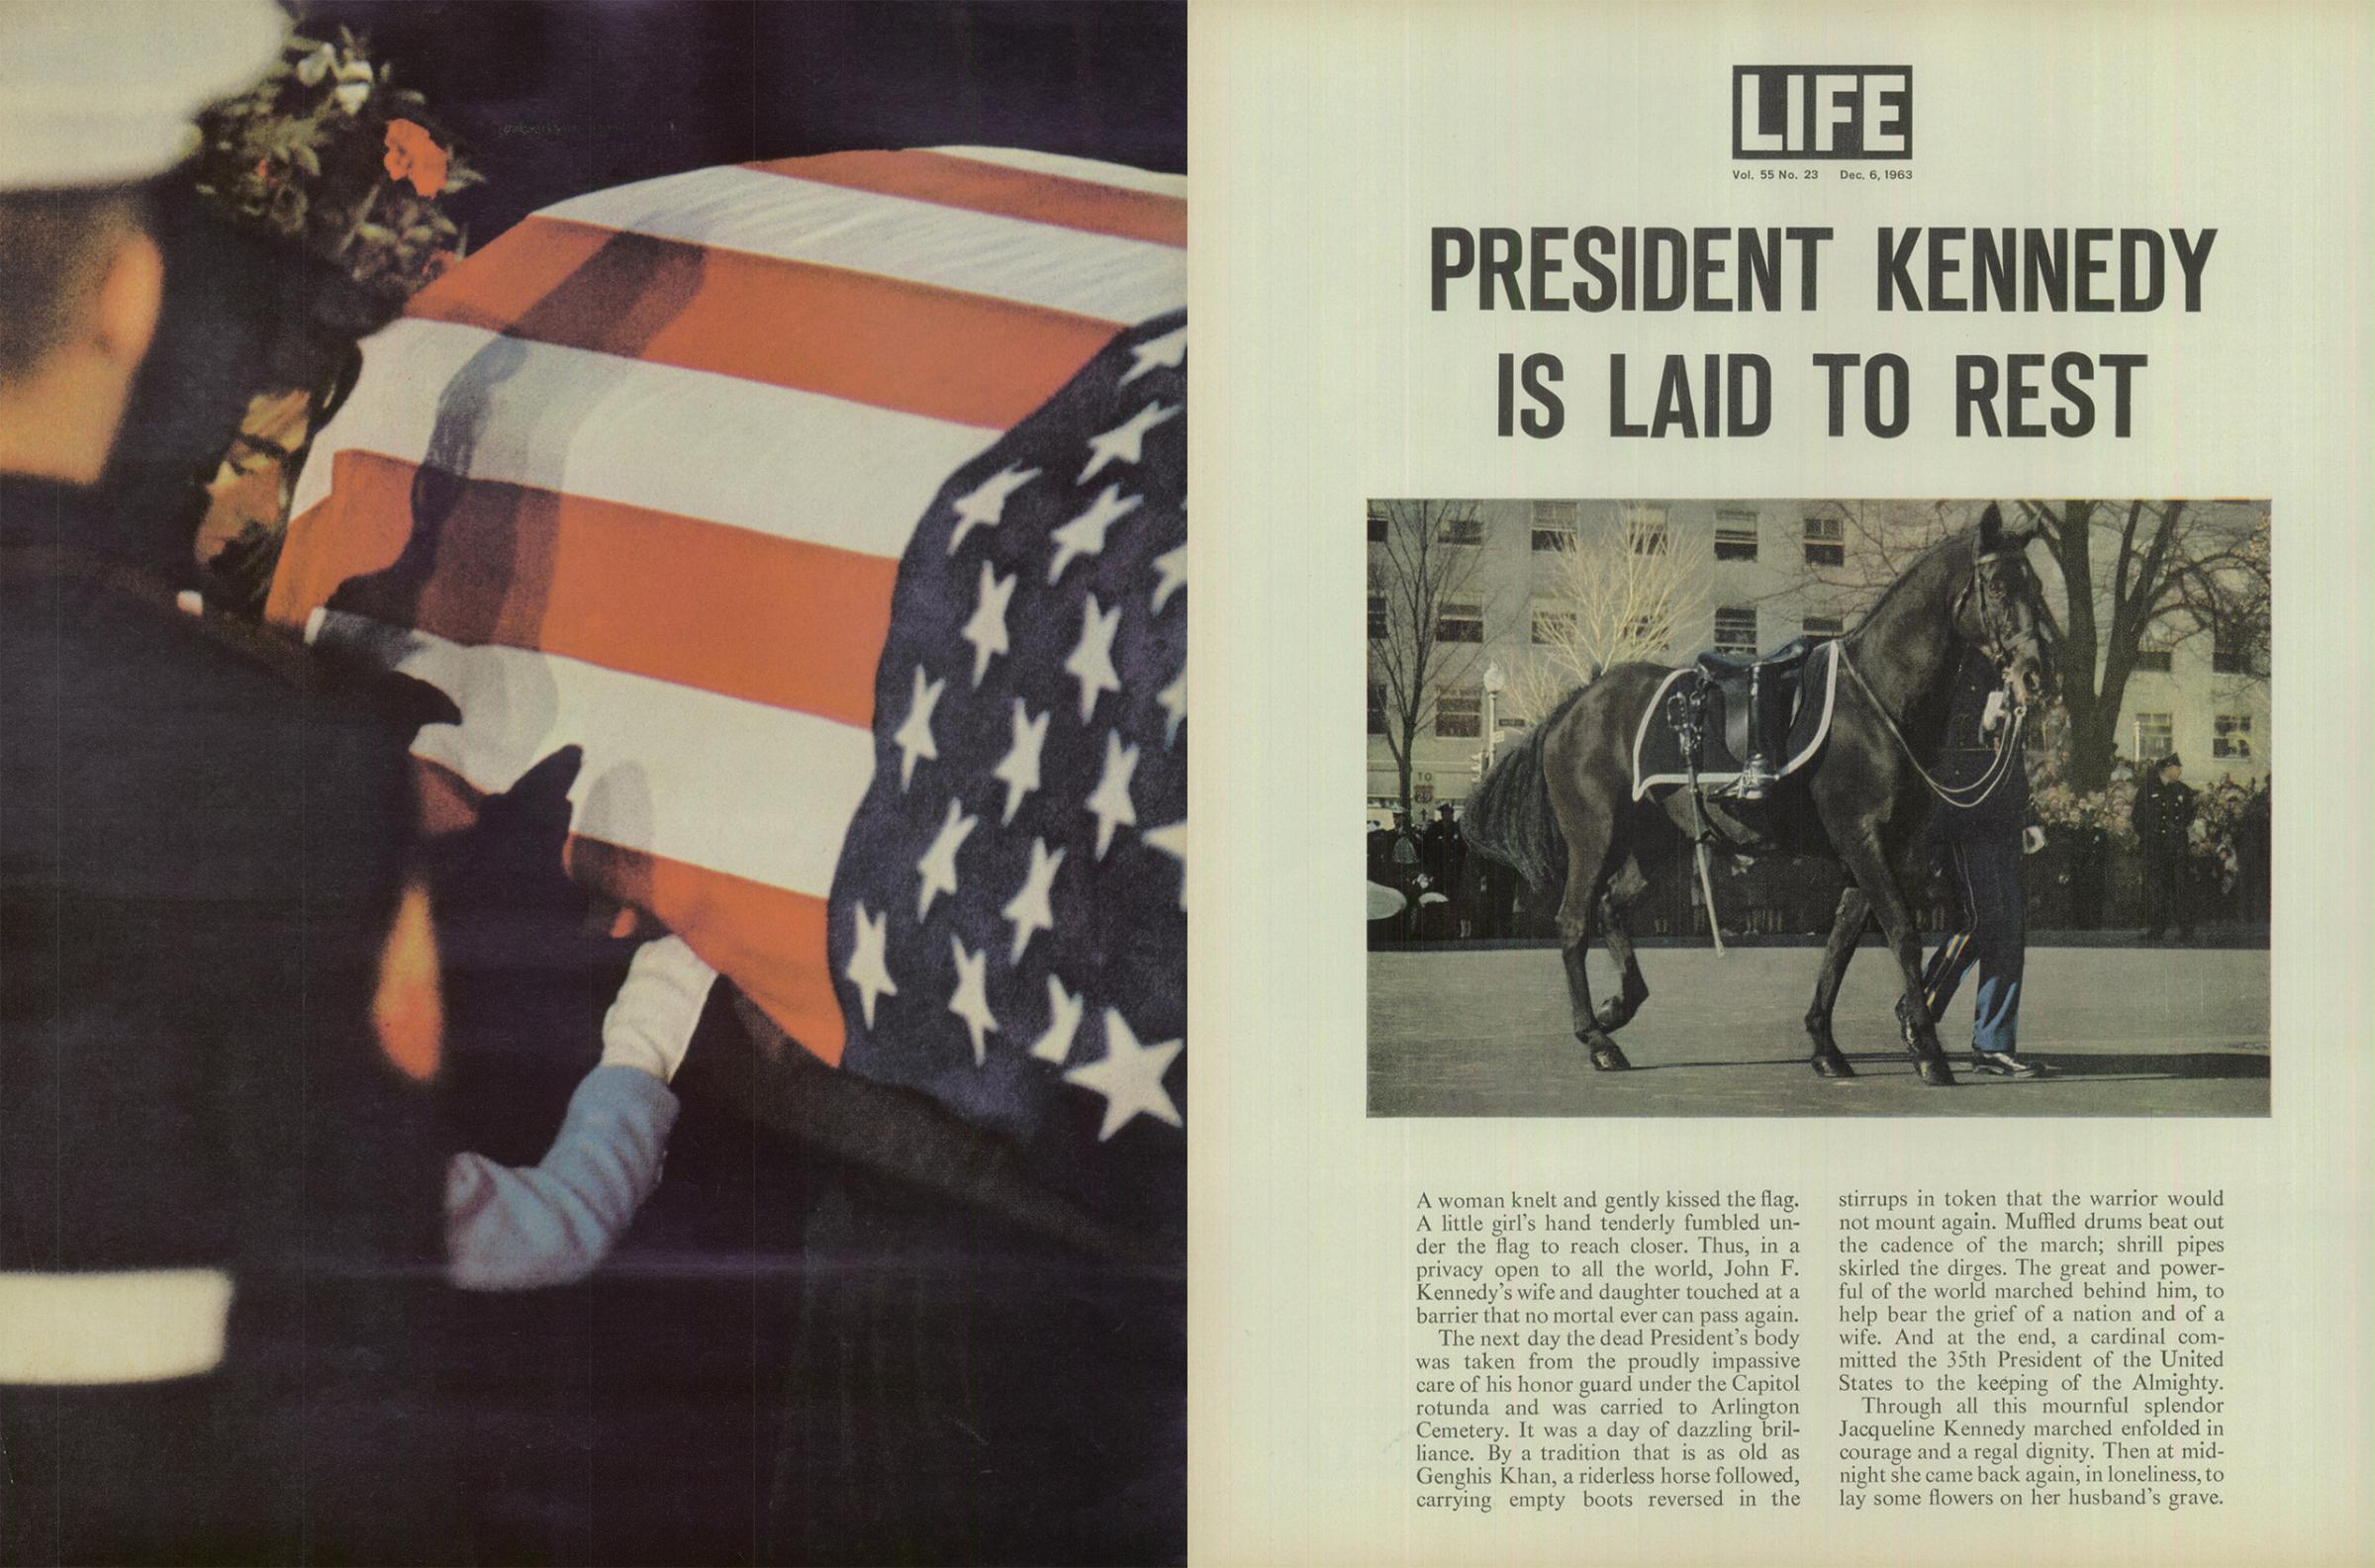 From the December 6, 1963 issue of LIFE magazine.